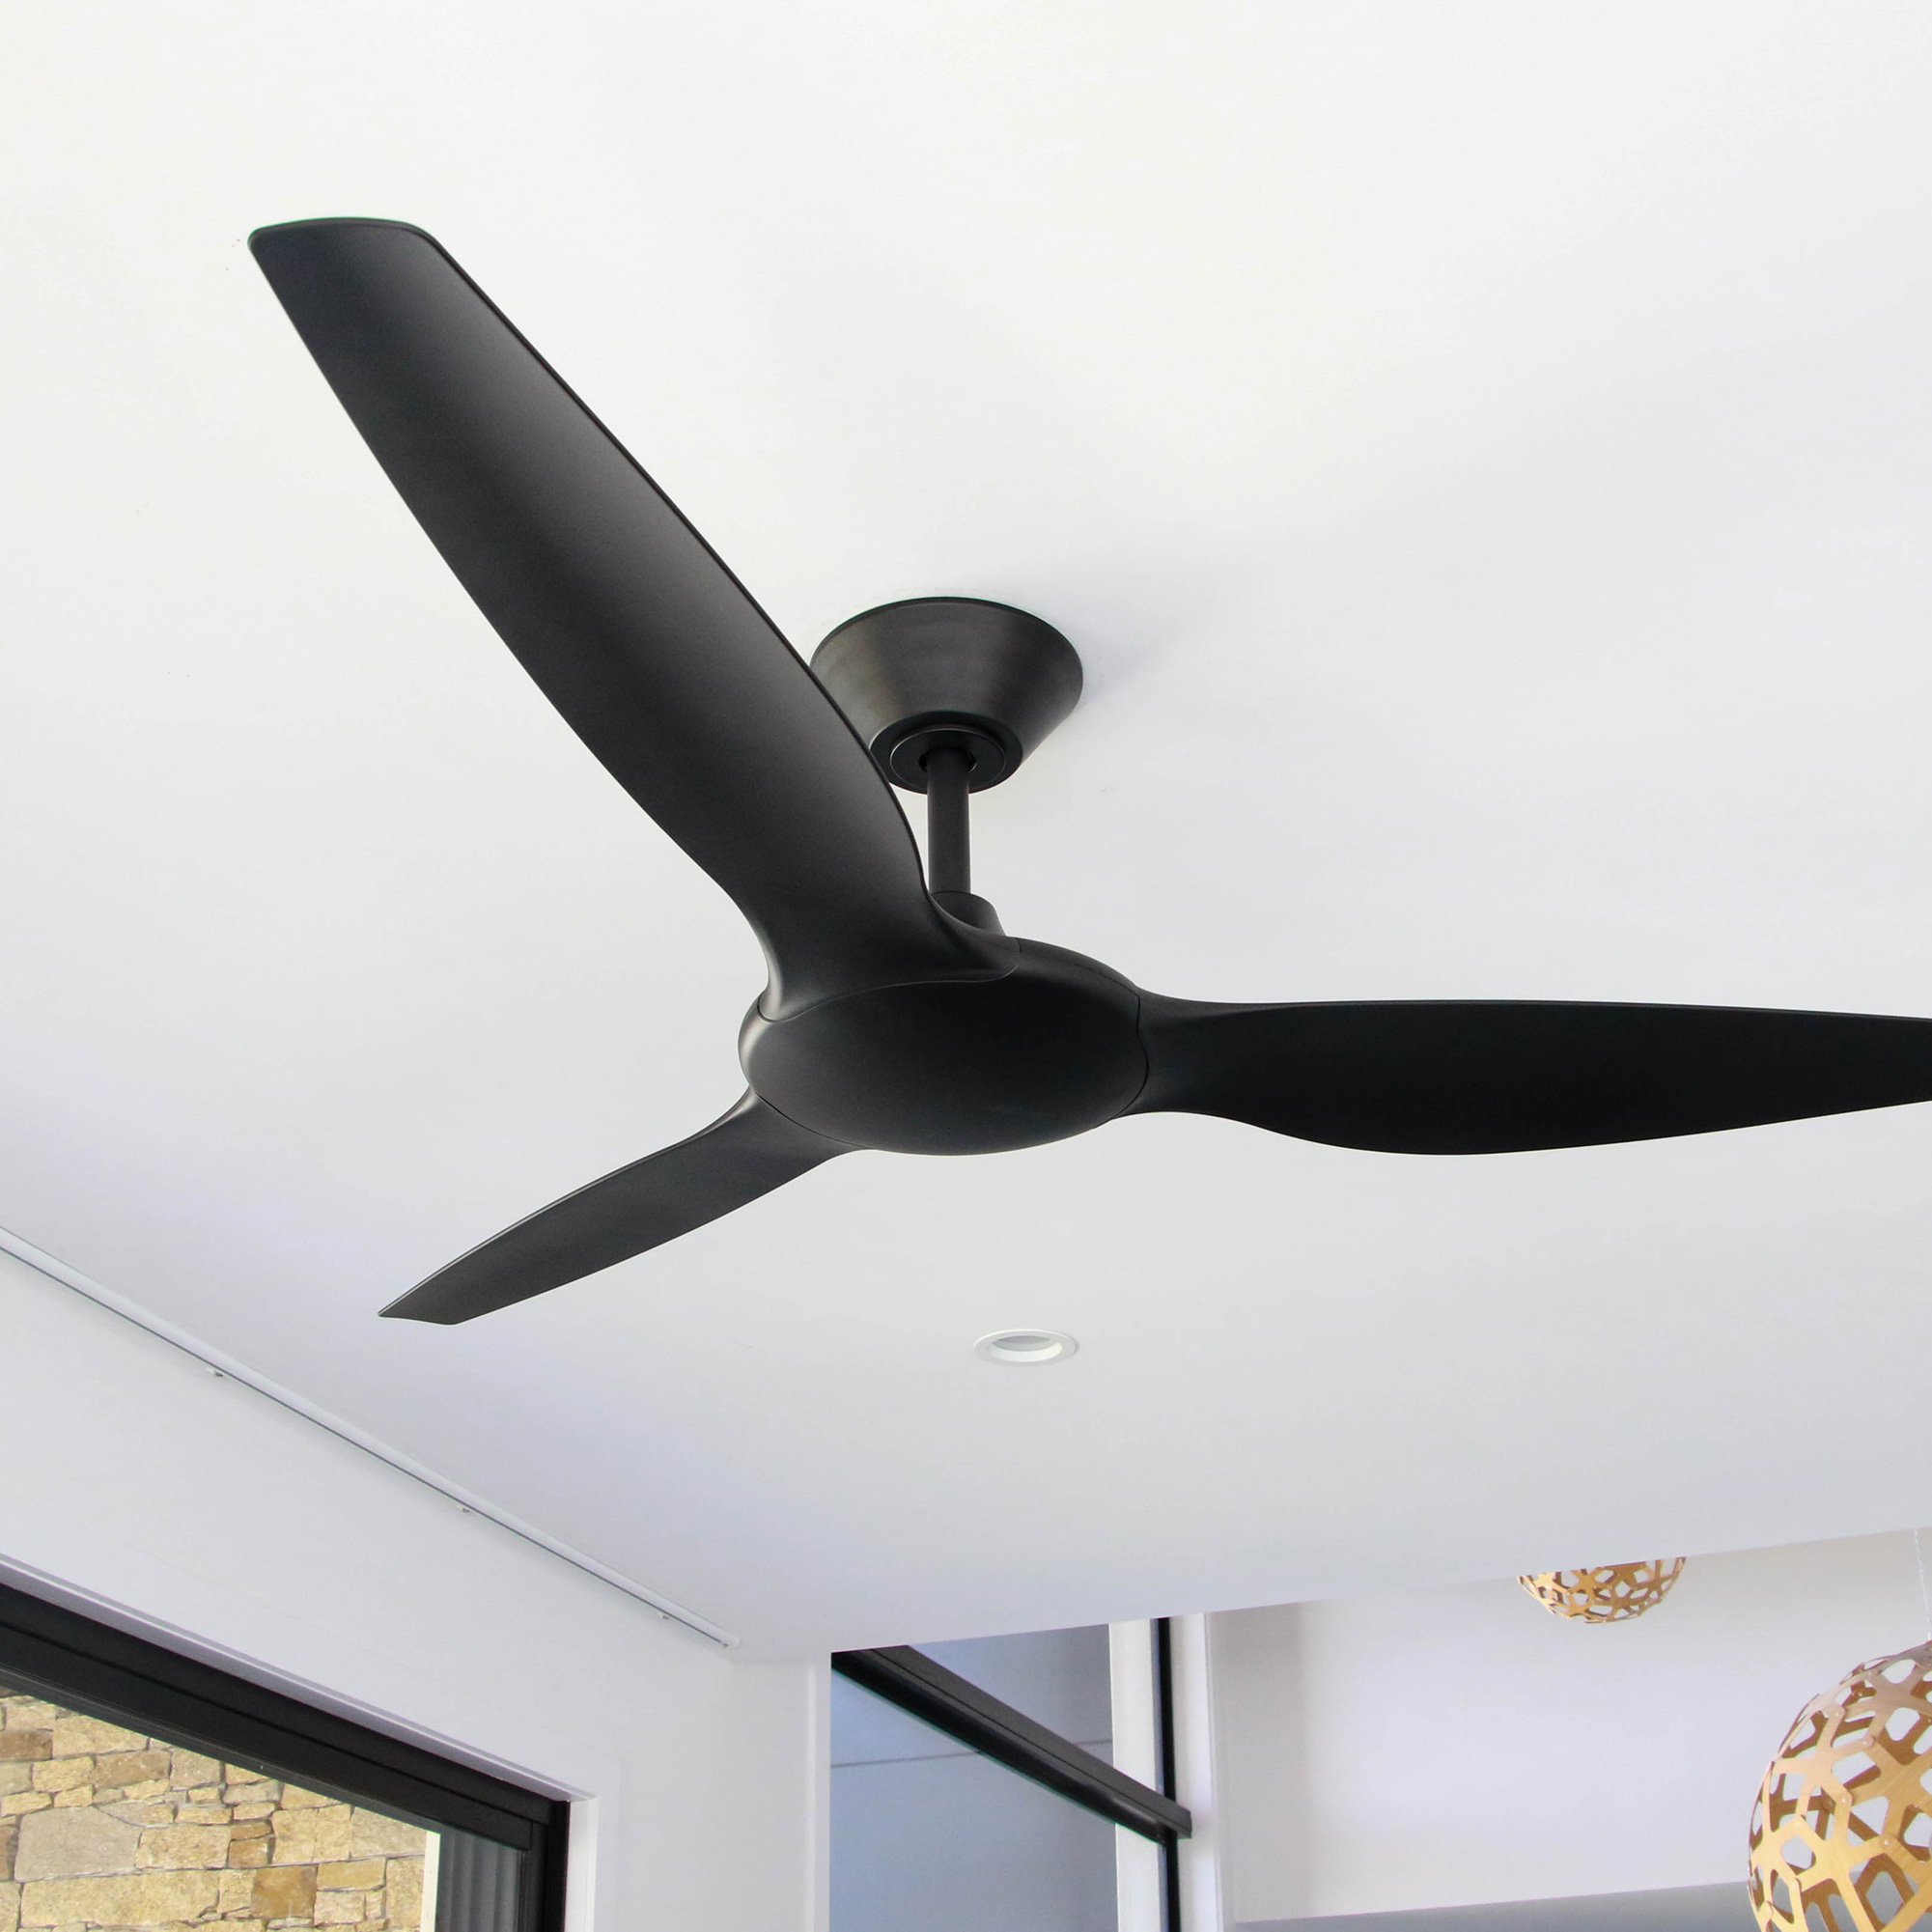 Dim your fan from anywhere!​